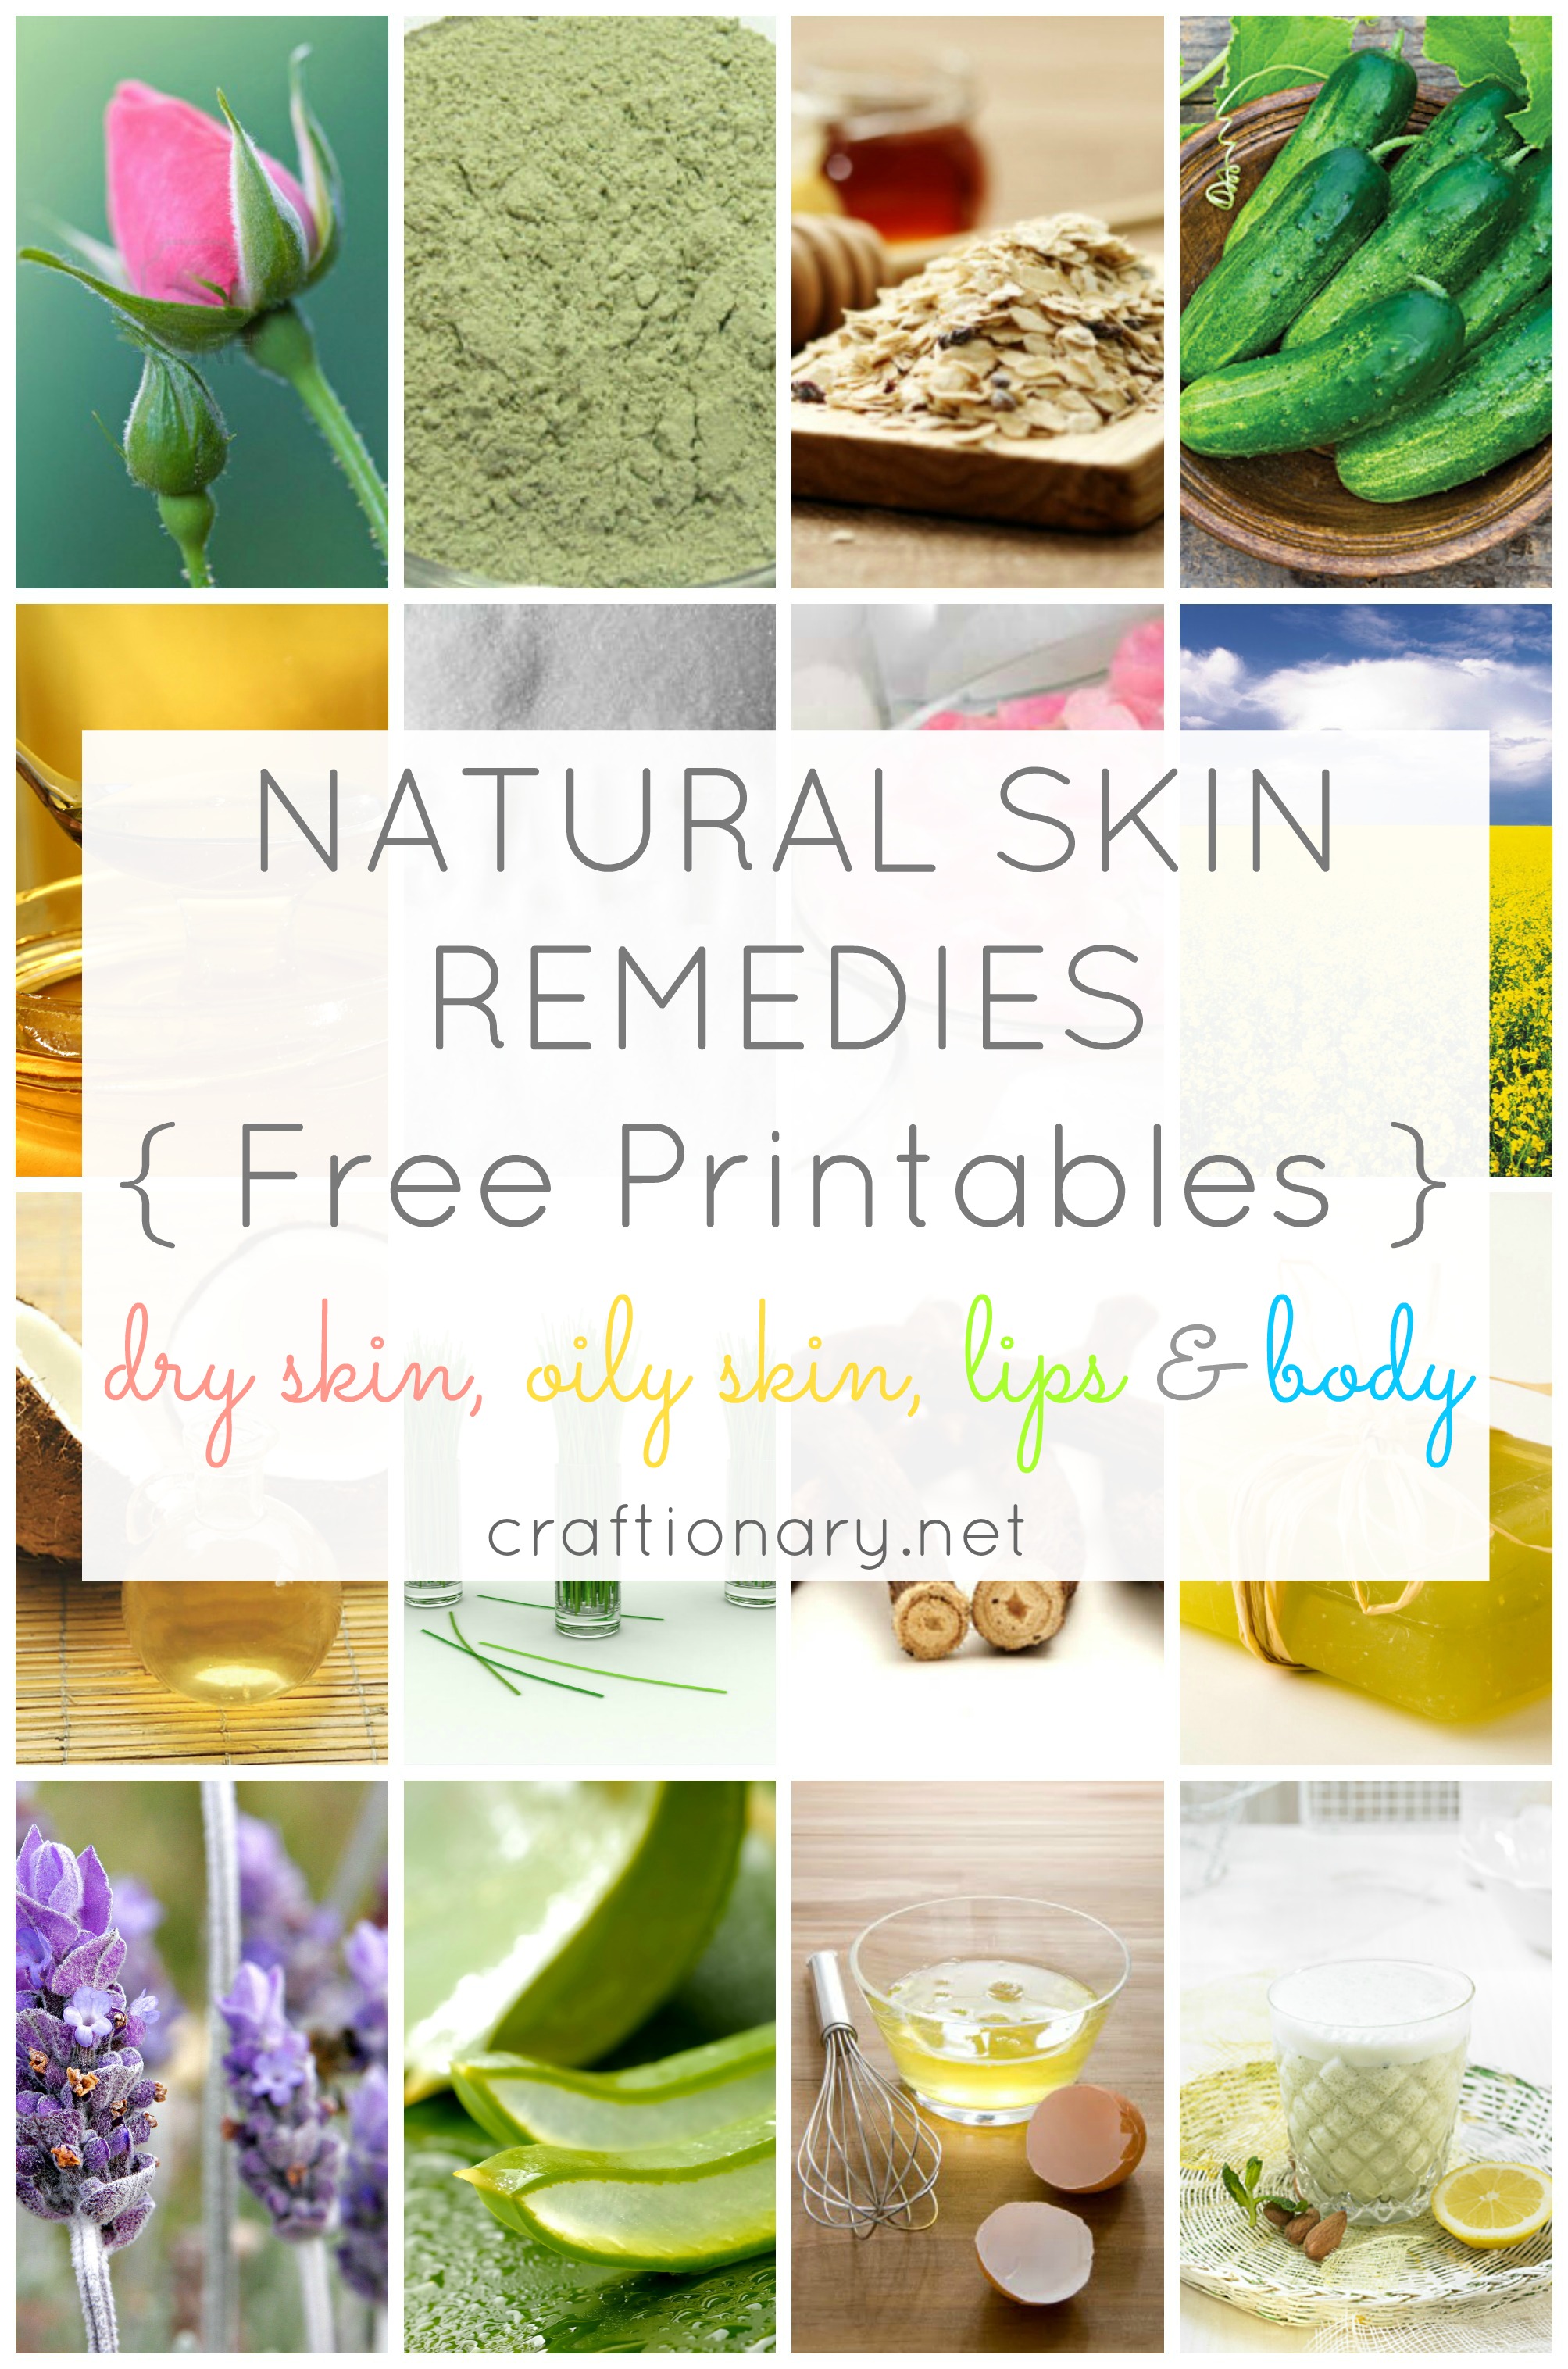 Natural skin remedies- Dry, Oily, Body & Lips (FREE  